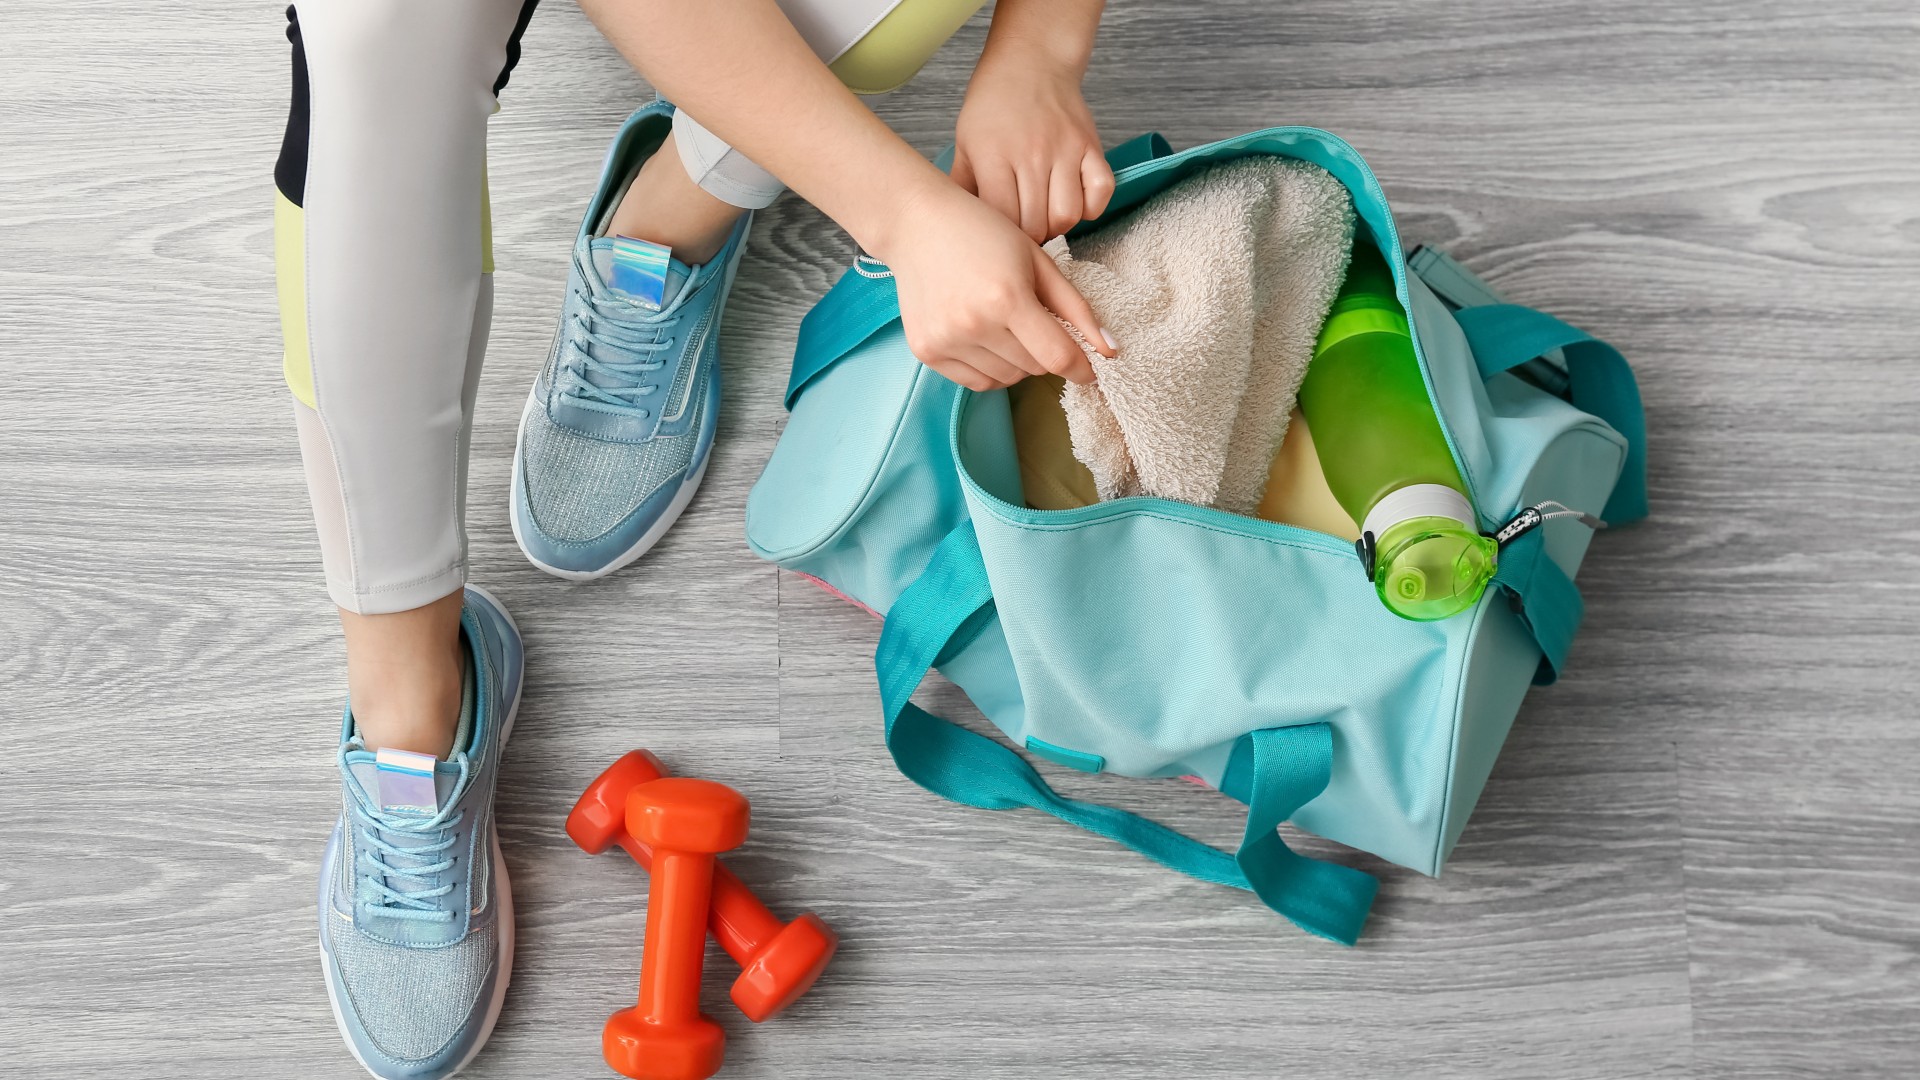 TOP 5 Best Gym Bags to Carry All Your Workout Essentials in Style 